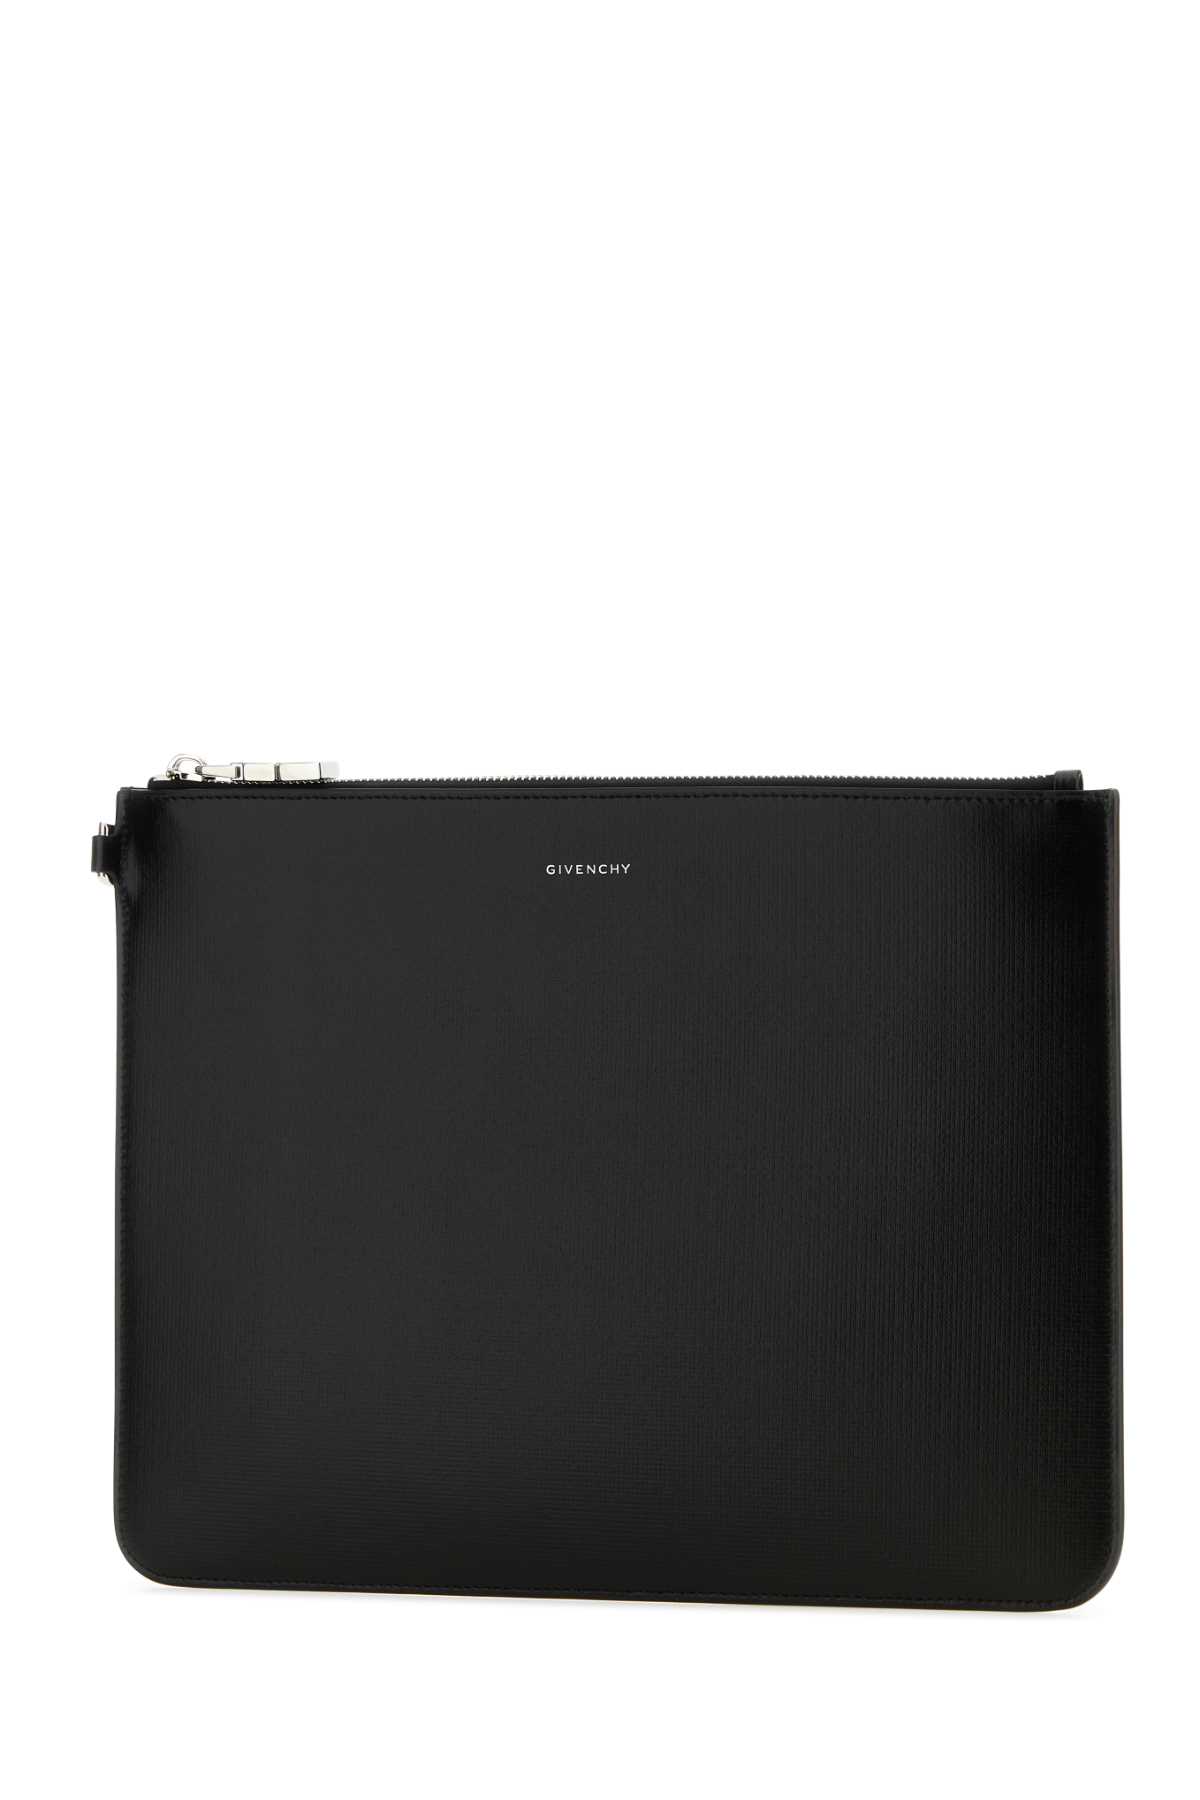 Shop Givenchy Black Leather Clutch